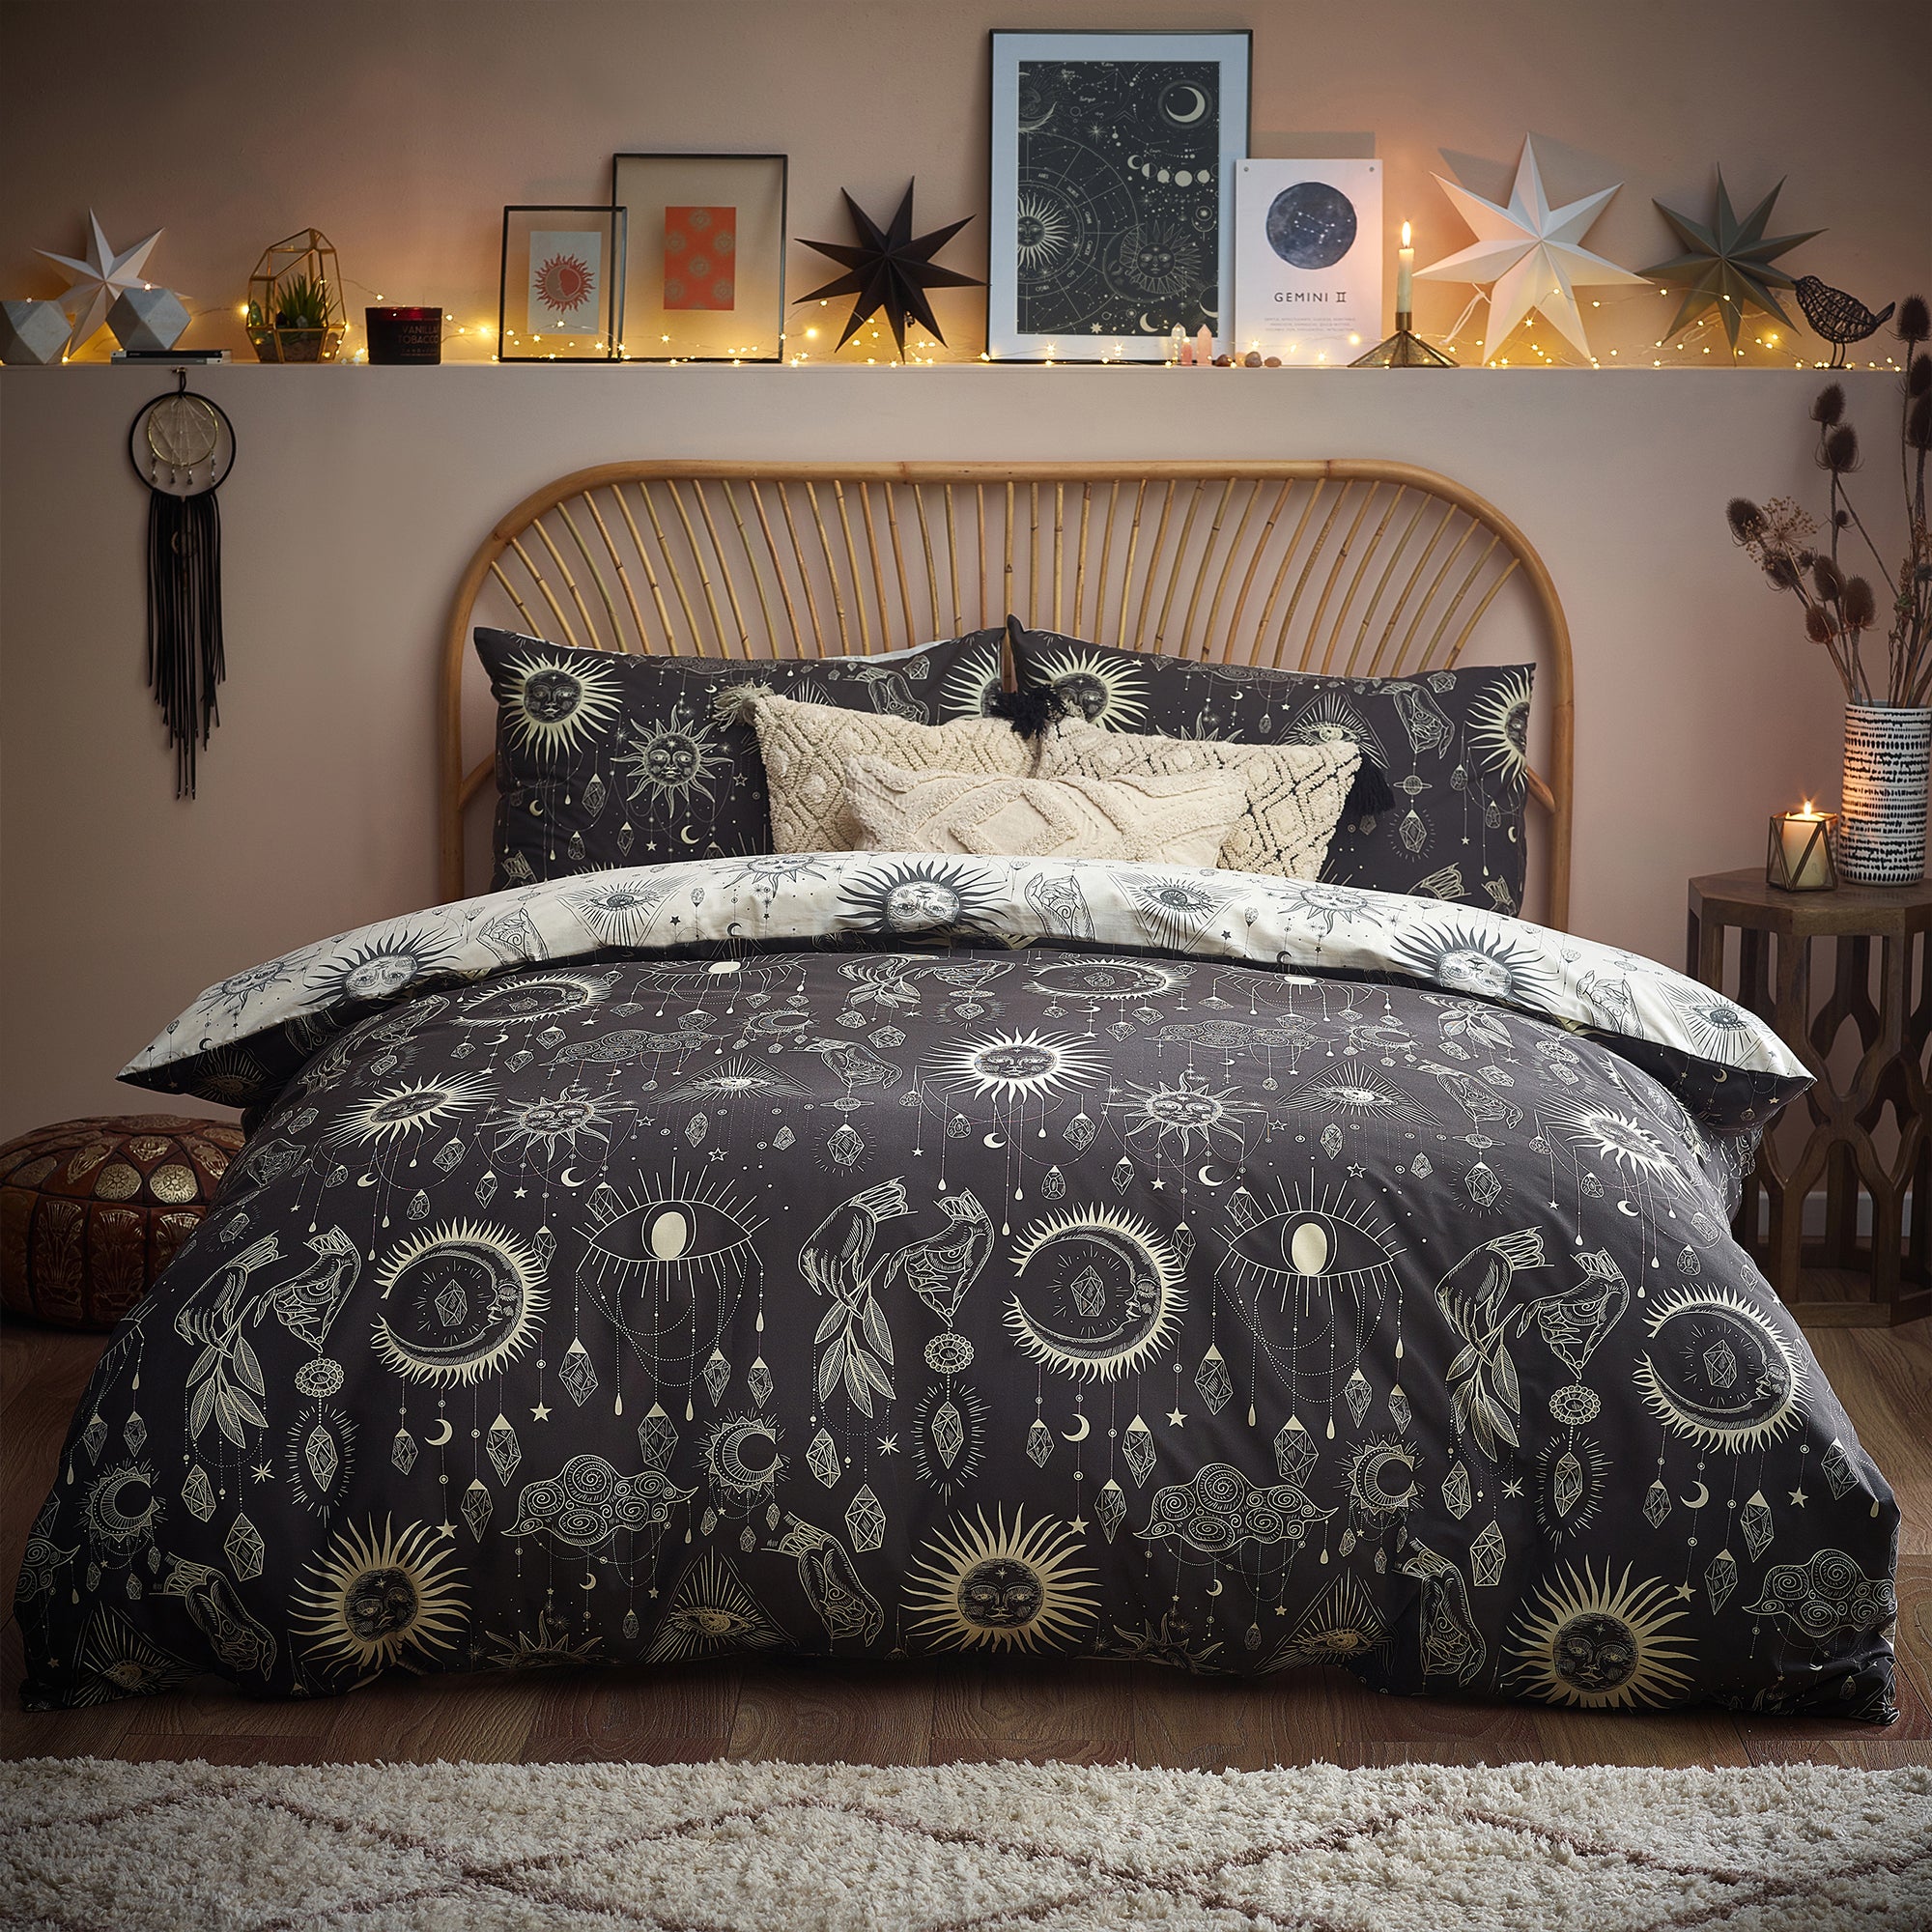 Furn Constellation Duvet Cover And Pillowcase Set Grey